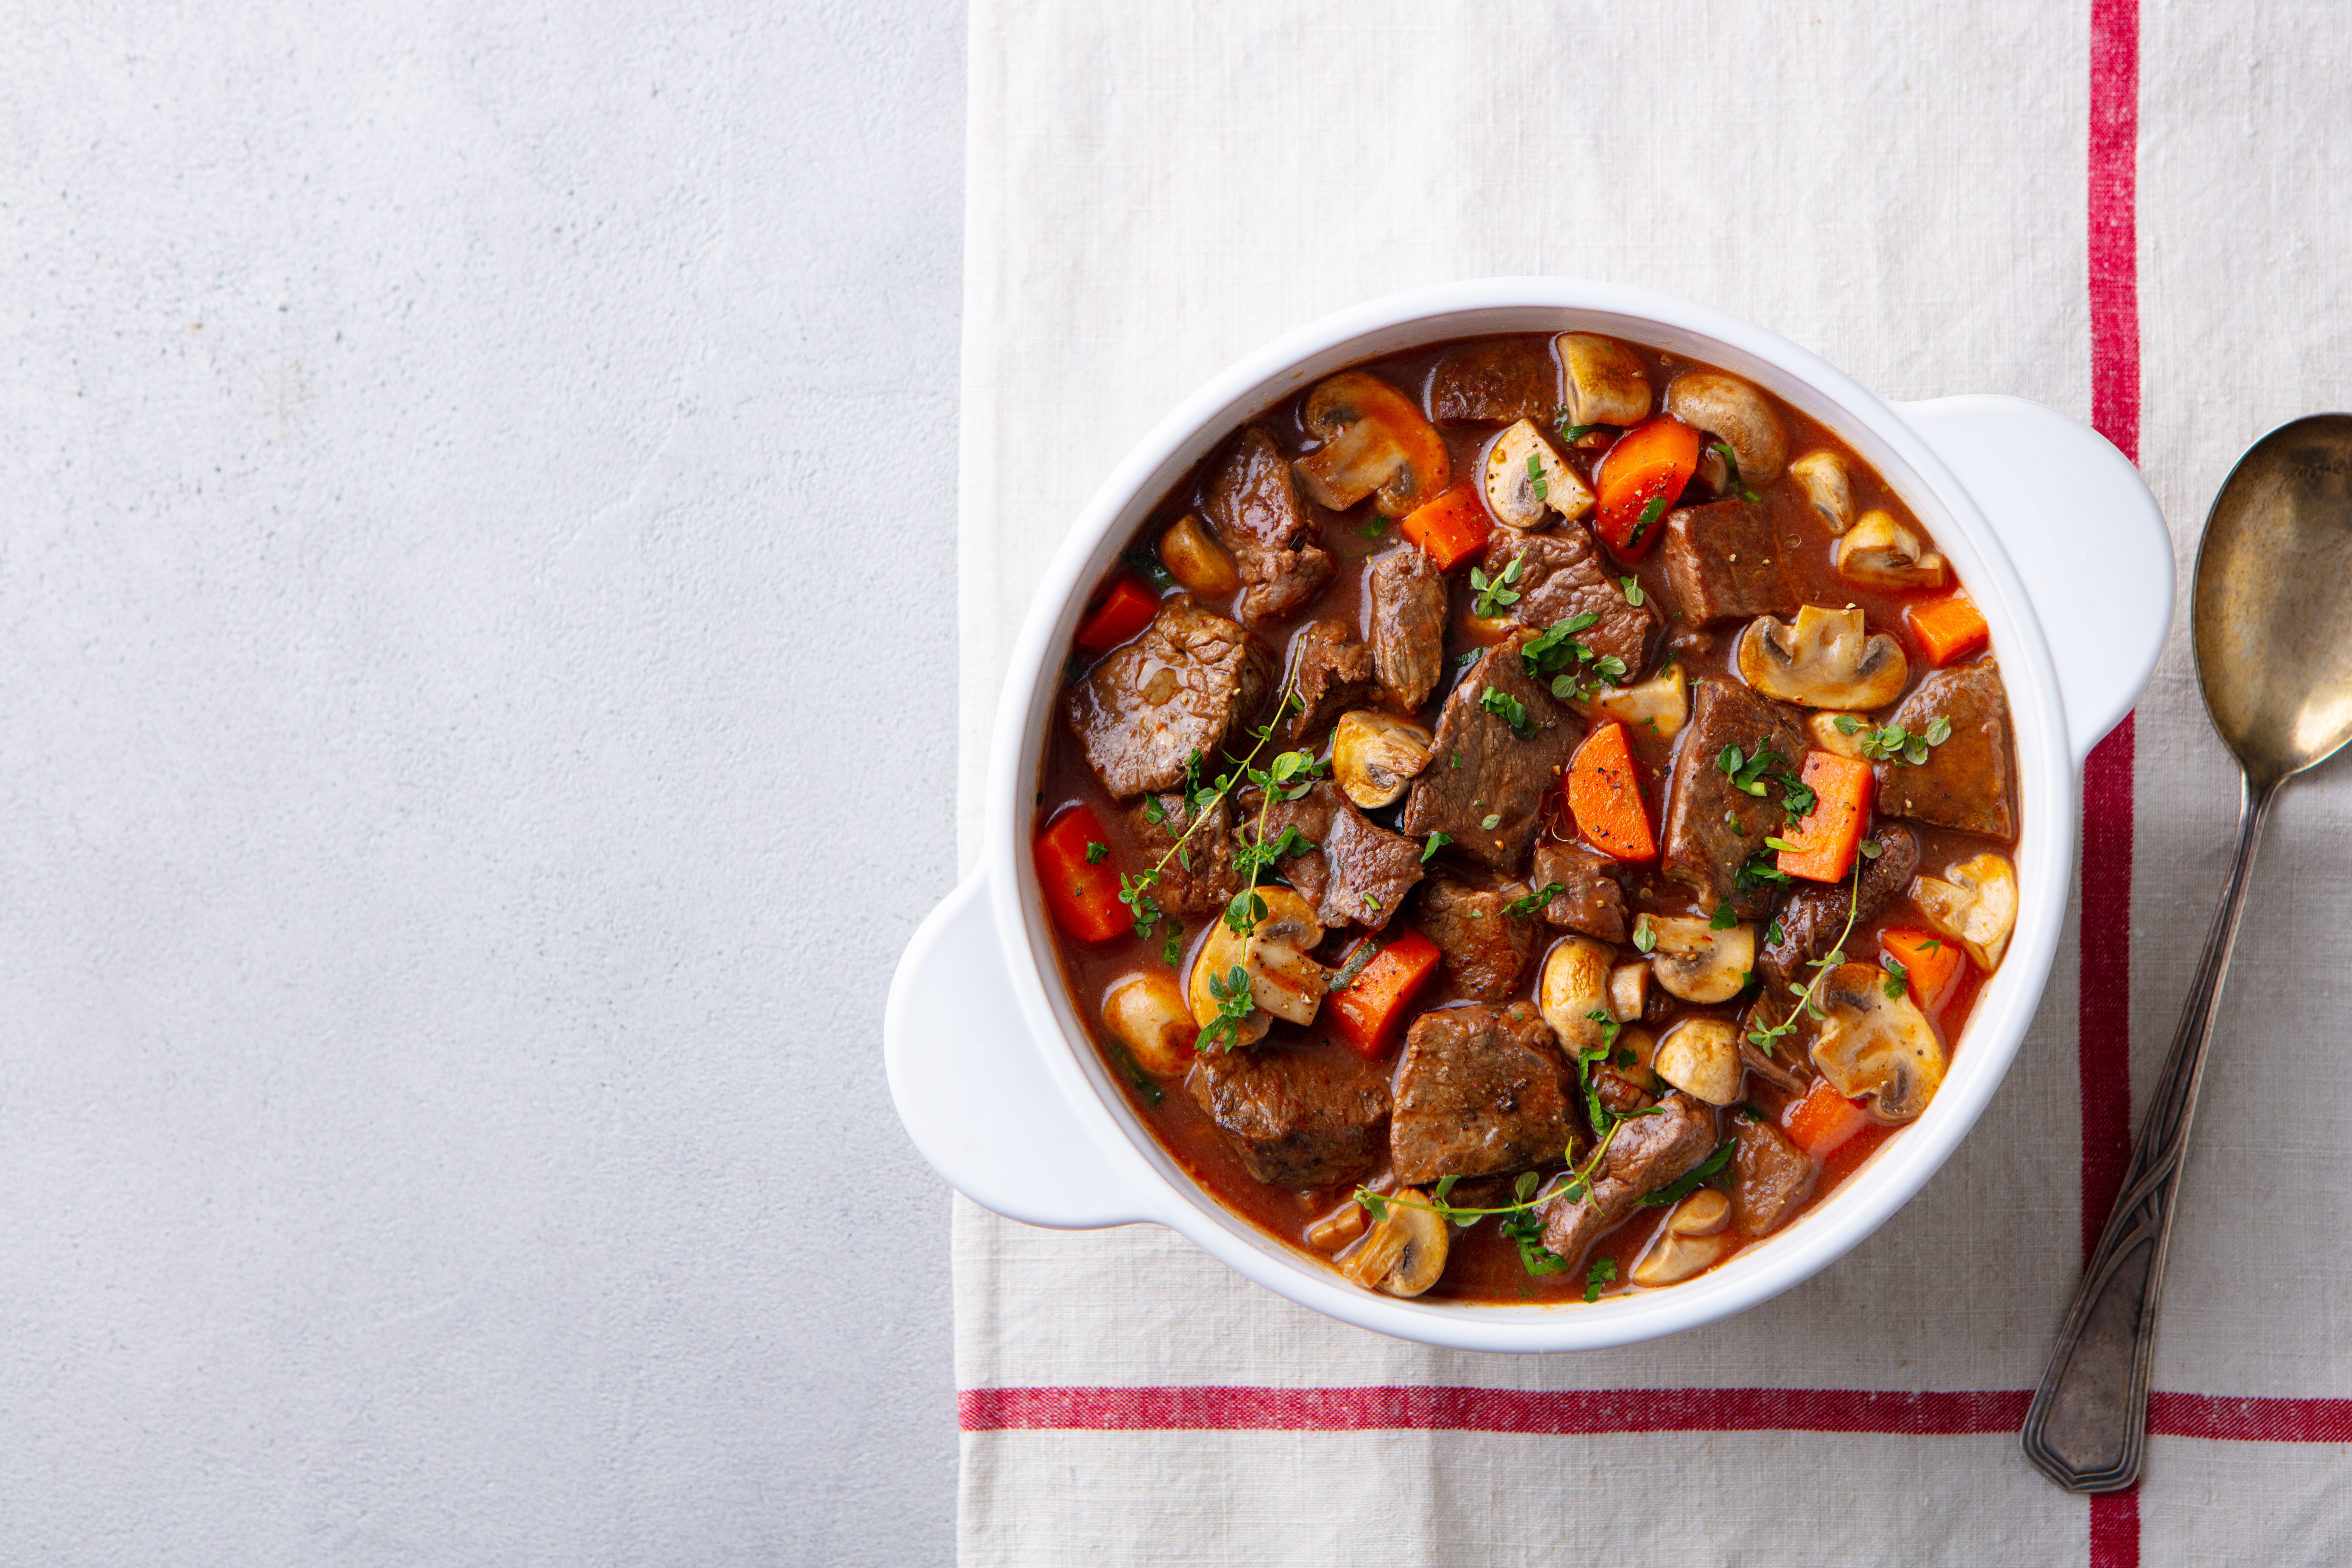 Beef bourguignon stew with vegetables